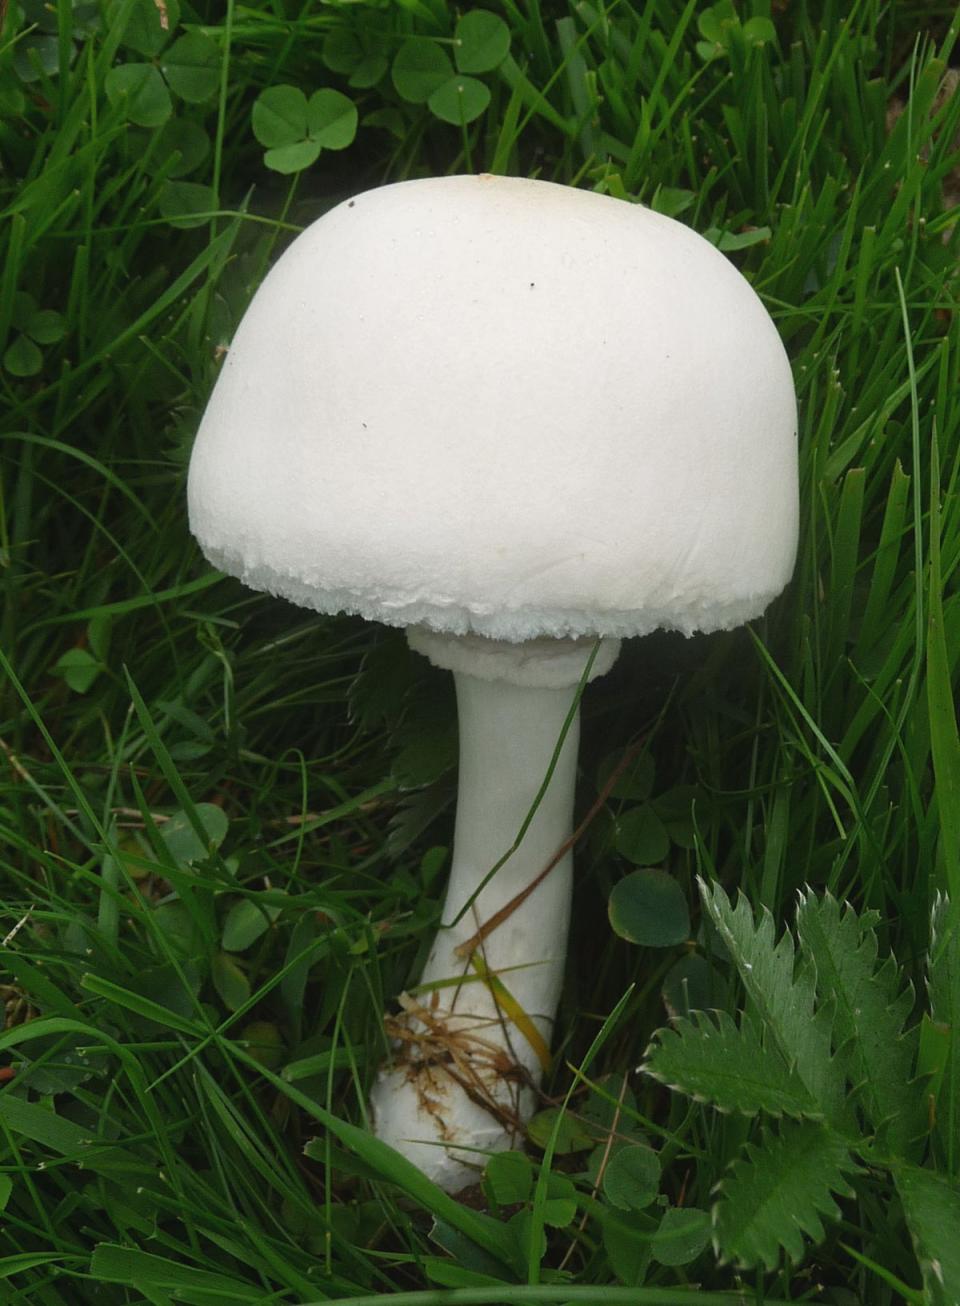 Destroying Angel’s are often found at the edges of woodlands (gailhampshire/Wikimedia Commons CC BY 2.0)